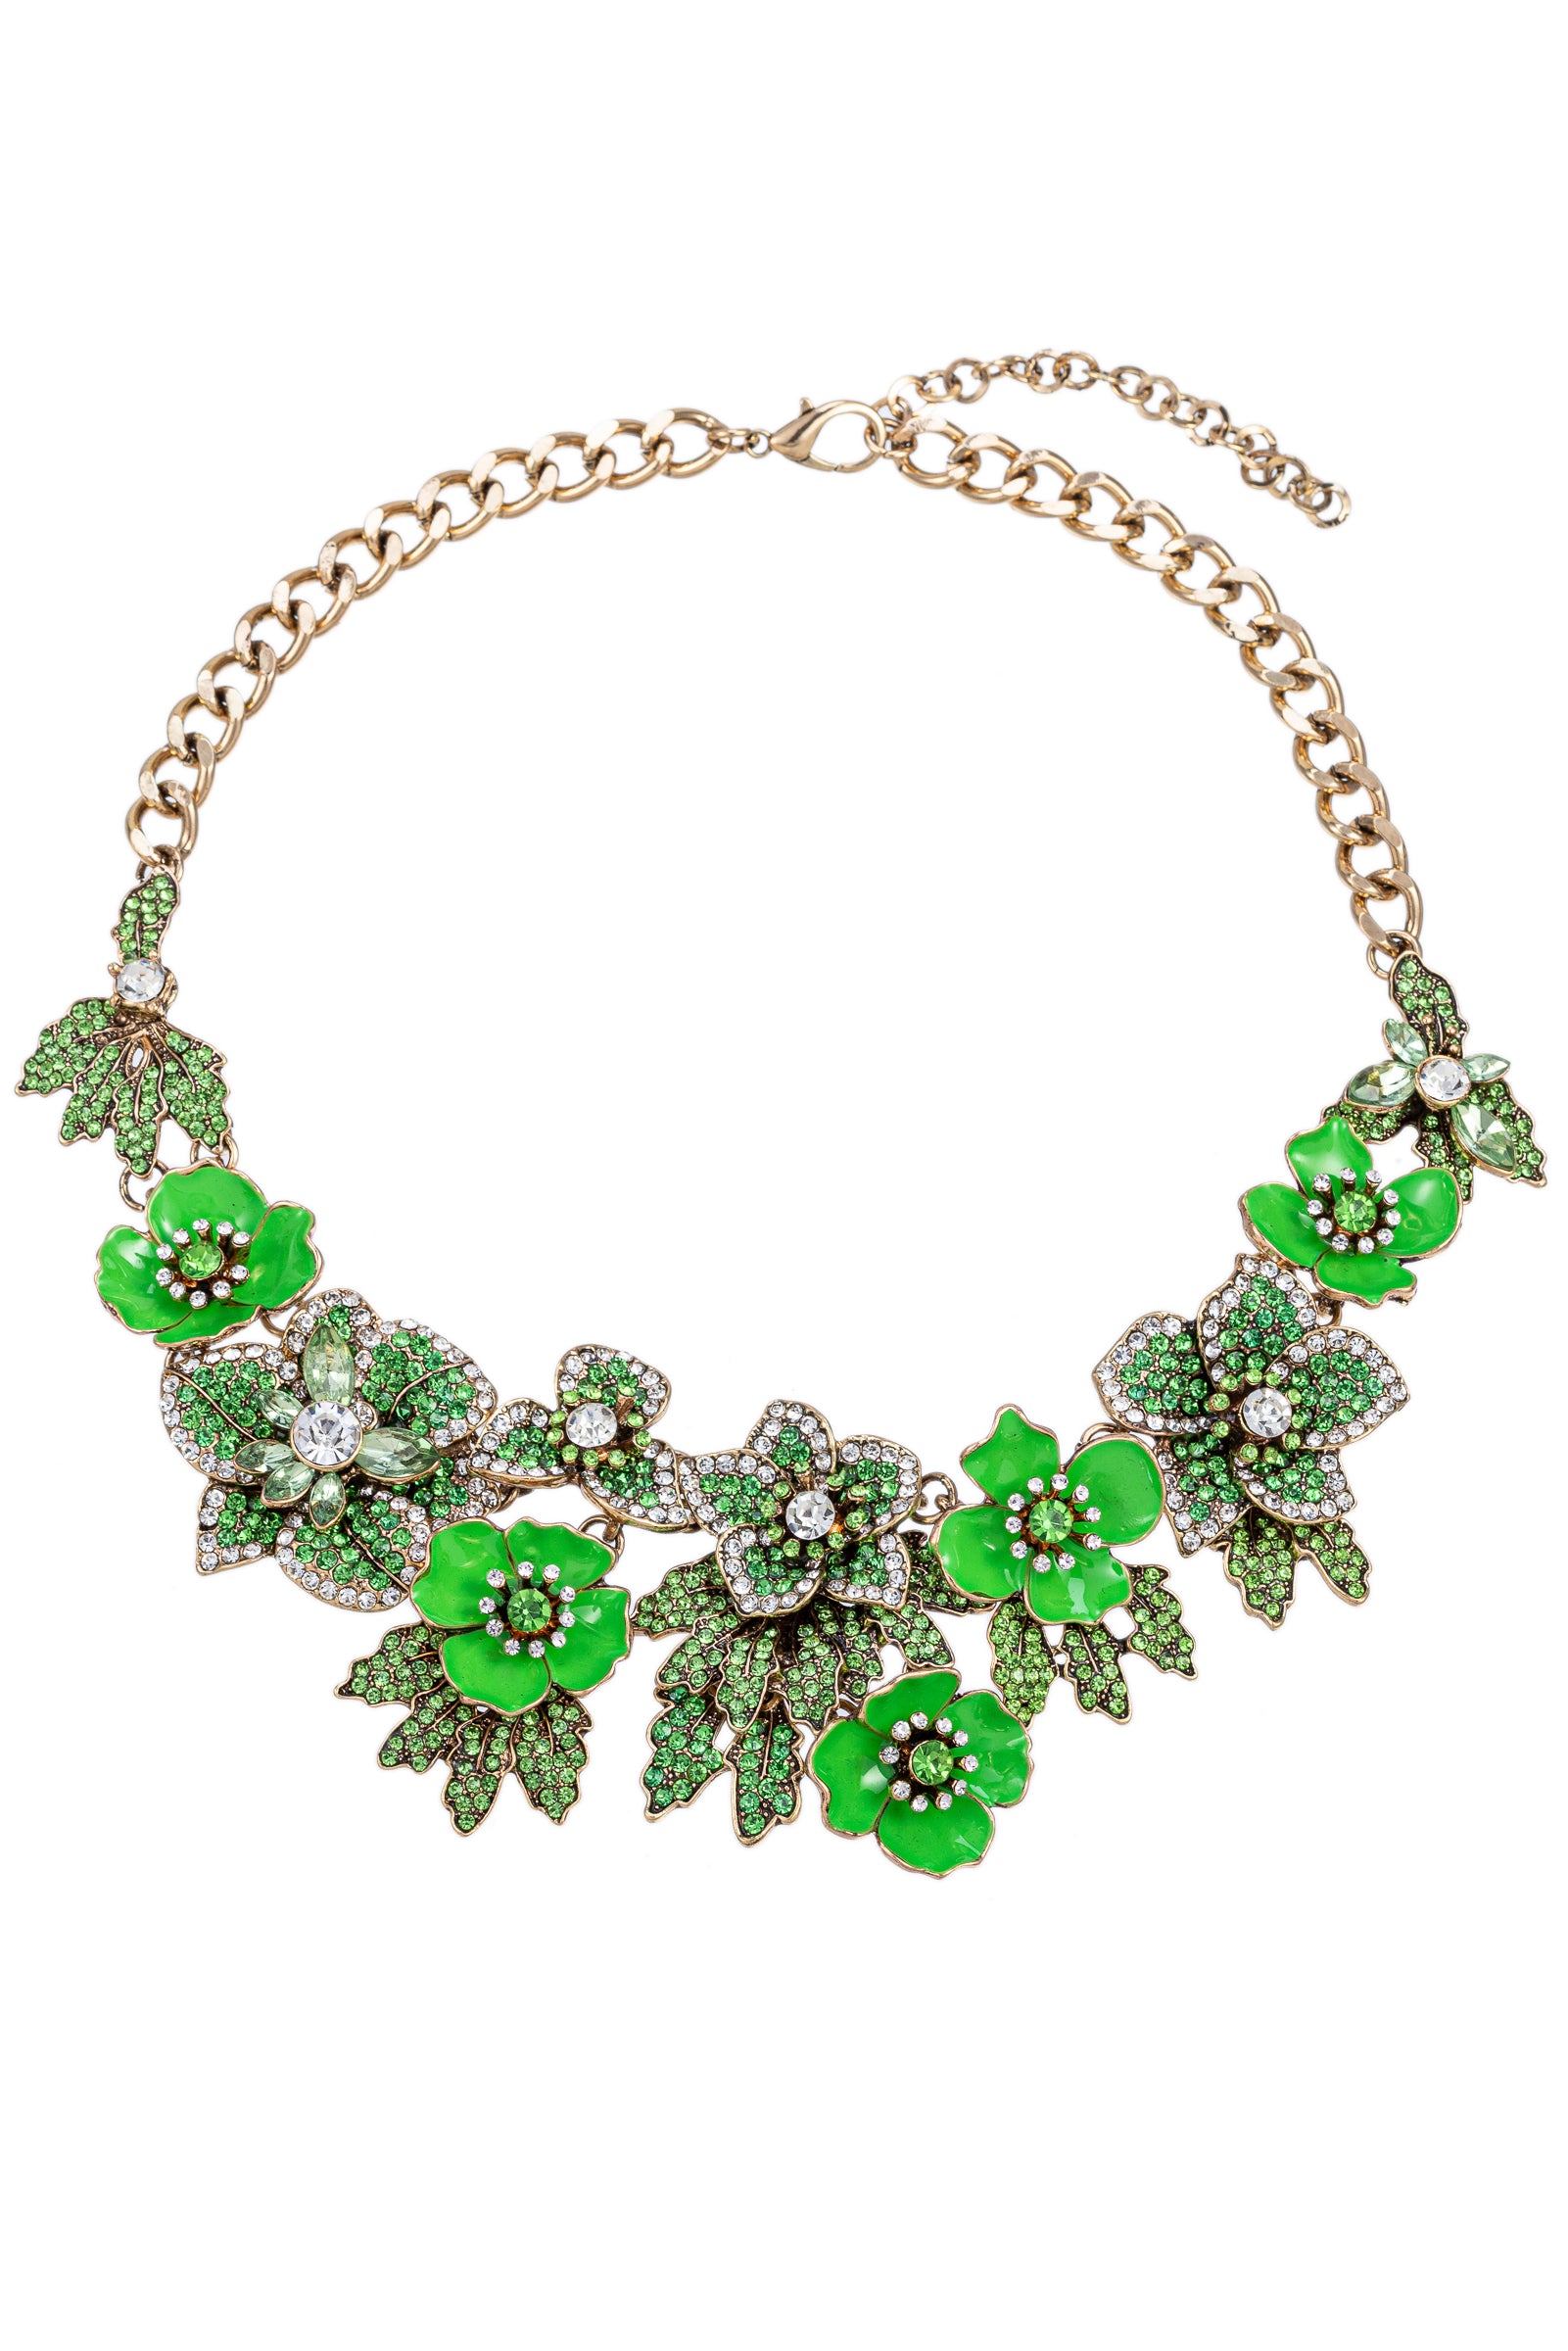 Green Daisy Flower Pendant Short Necklace With Golden Chain/Necklace Set  For Girl's & Women